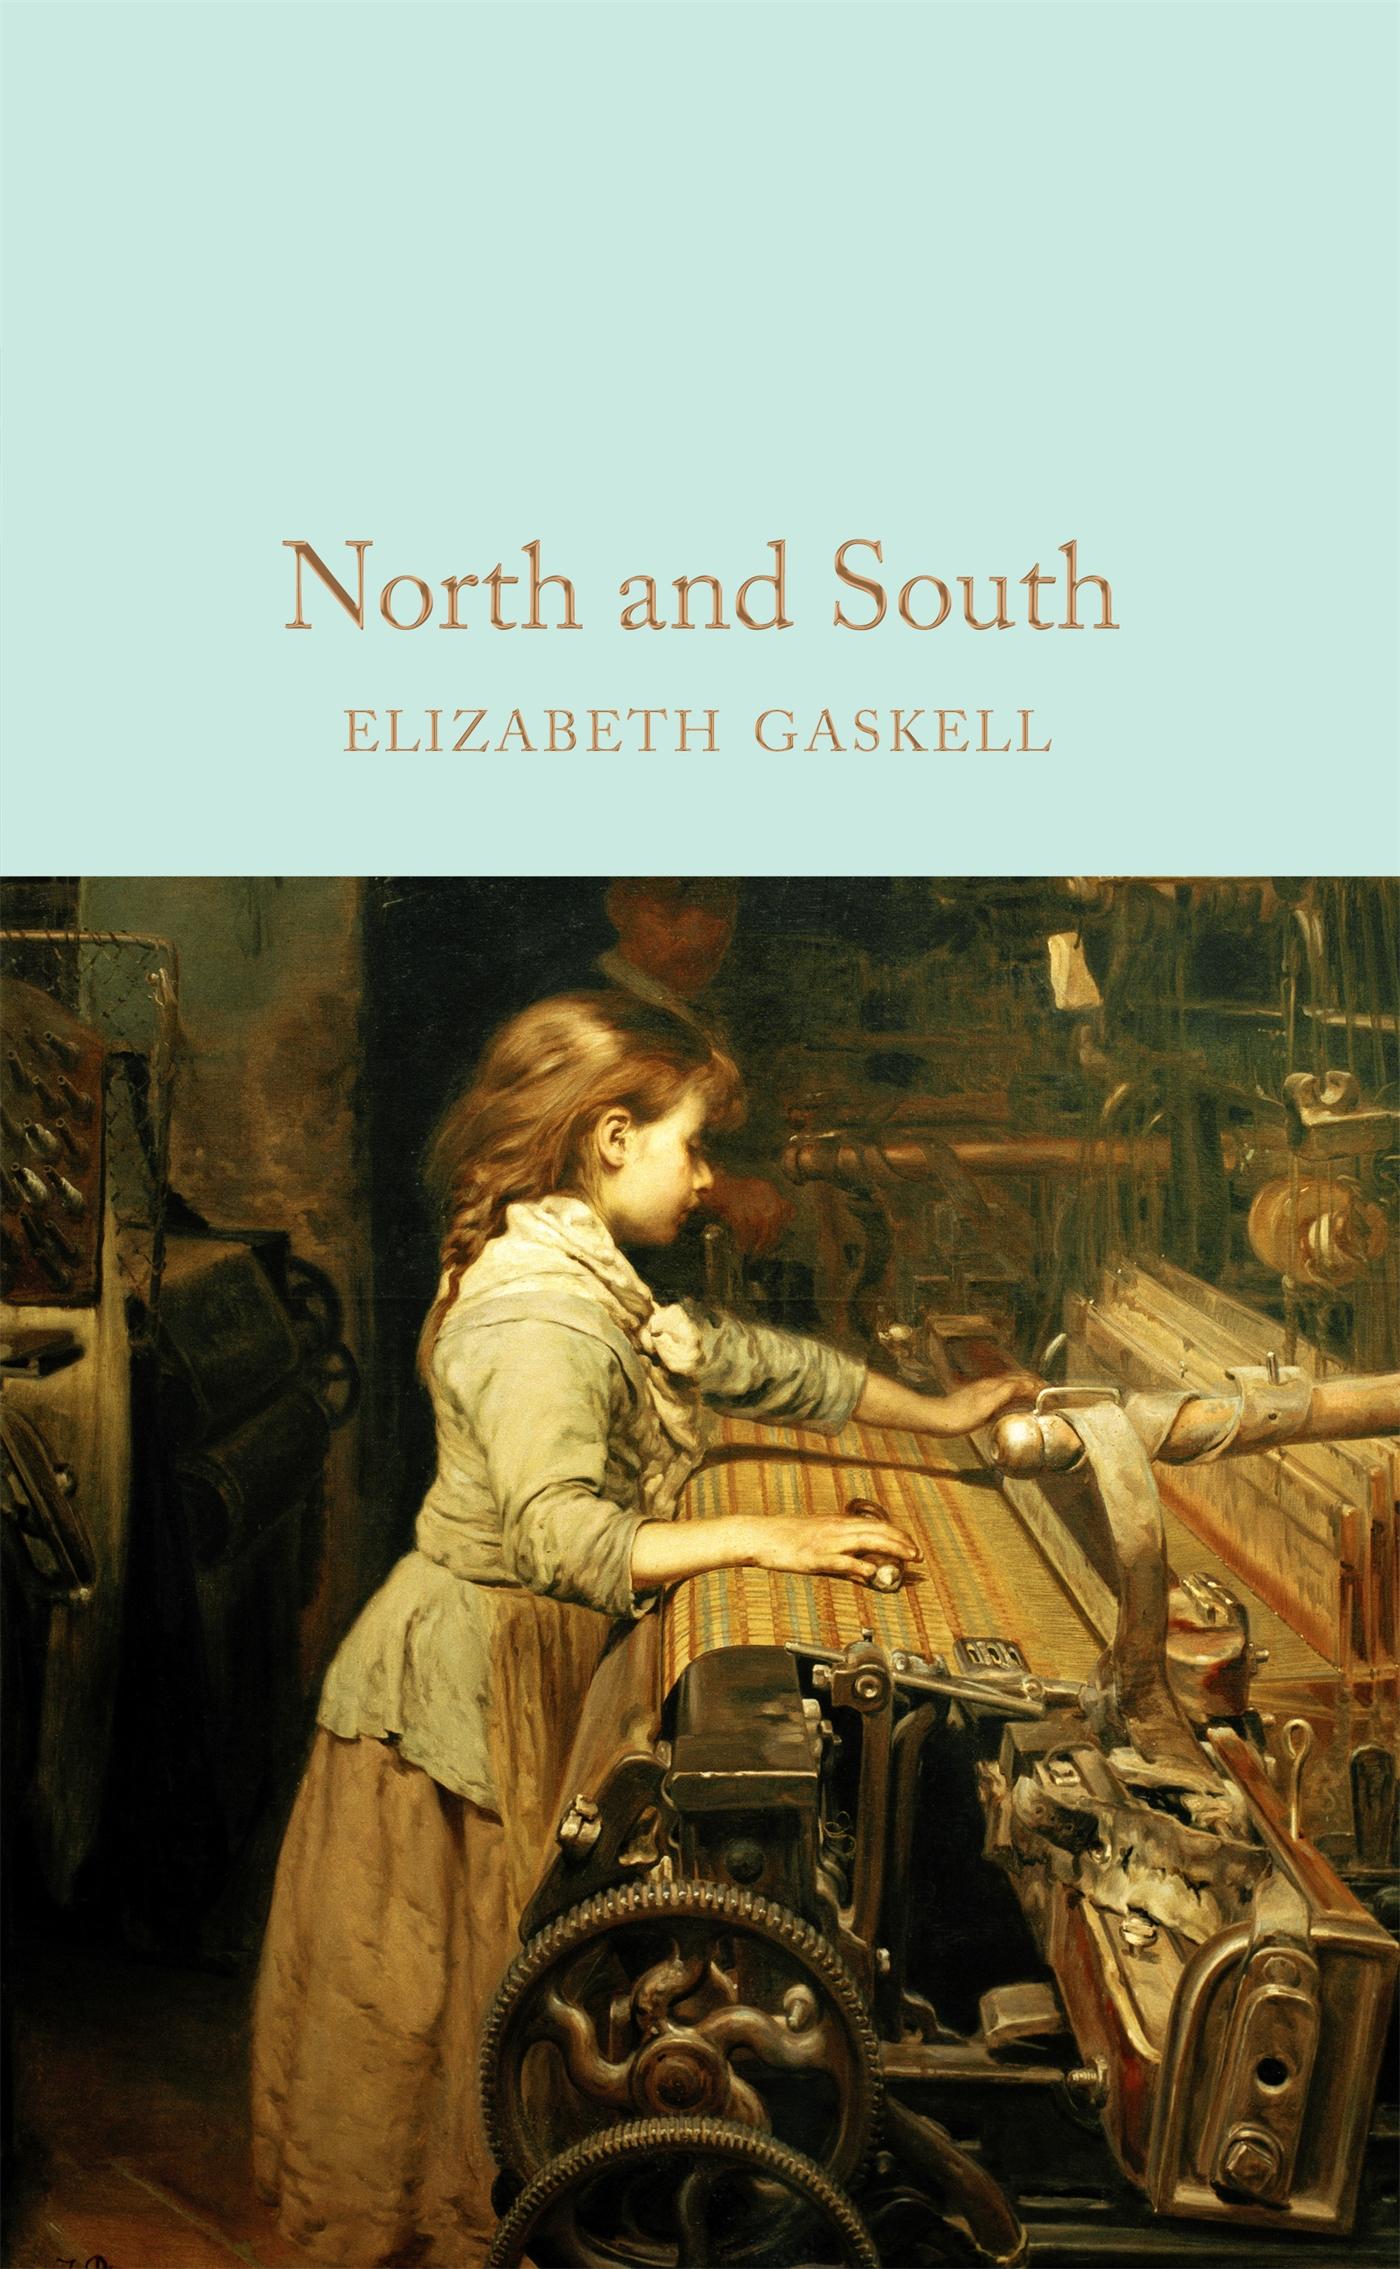 North and South / Elizabeth Gaskell / Buch / Macmillan Collector's Library / 656 S. / Englisch / 2017 / Pan Macmillan / EAN 9781509827947 - Gaskell, Elizabeth